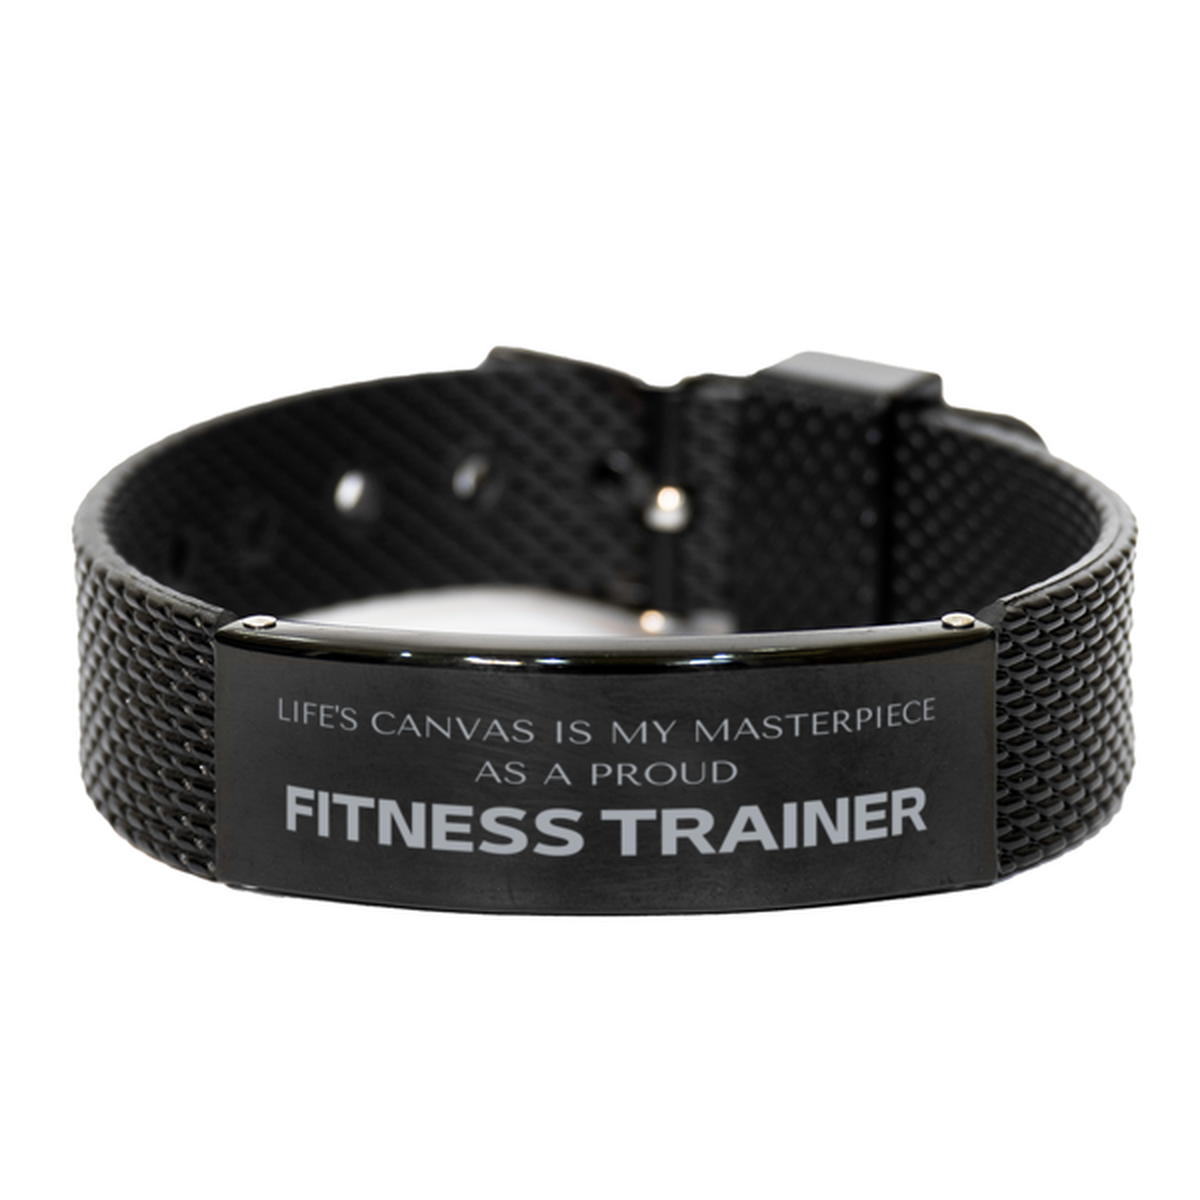 Proud Fitness Trainer Gifts, Life's canvas is my masterpiece, Epic Birthday Christmas Unique Black Shark Mesh Bracelet For Fitness Trainer, Coworkers, Men, Women, Friends